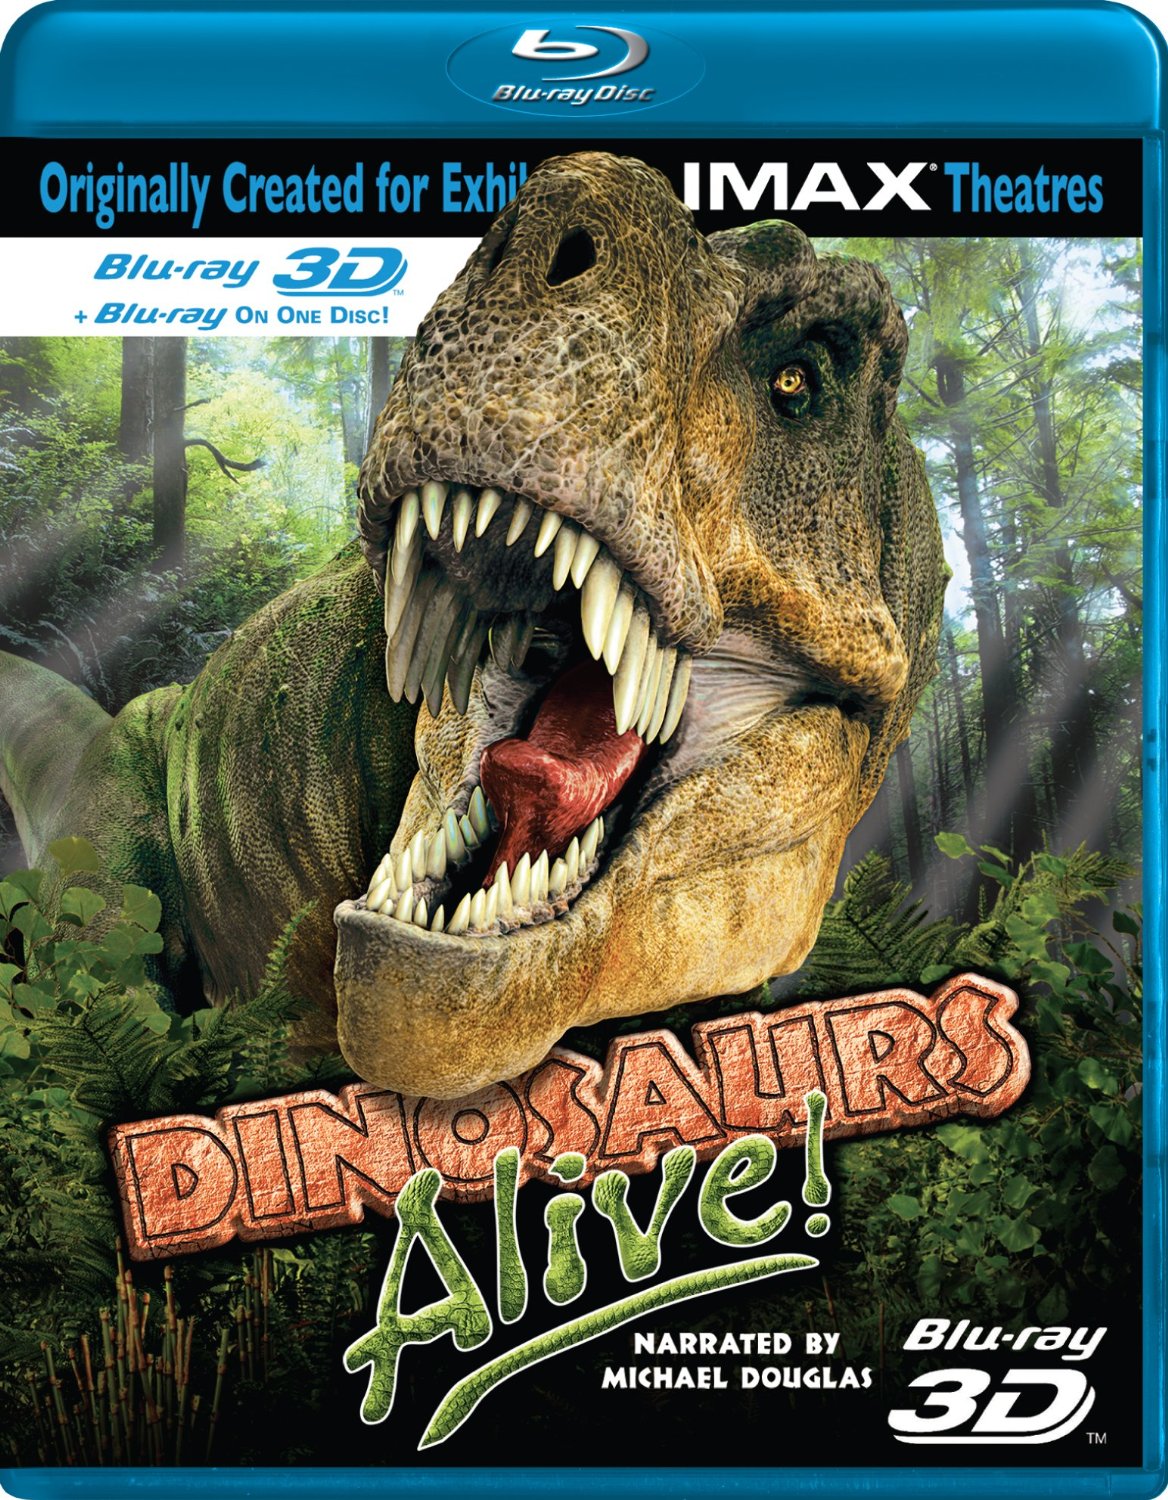 IMAX: DINOSAURS ALIVE 3D / (3-D AC3 DOL DTS SUB)